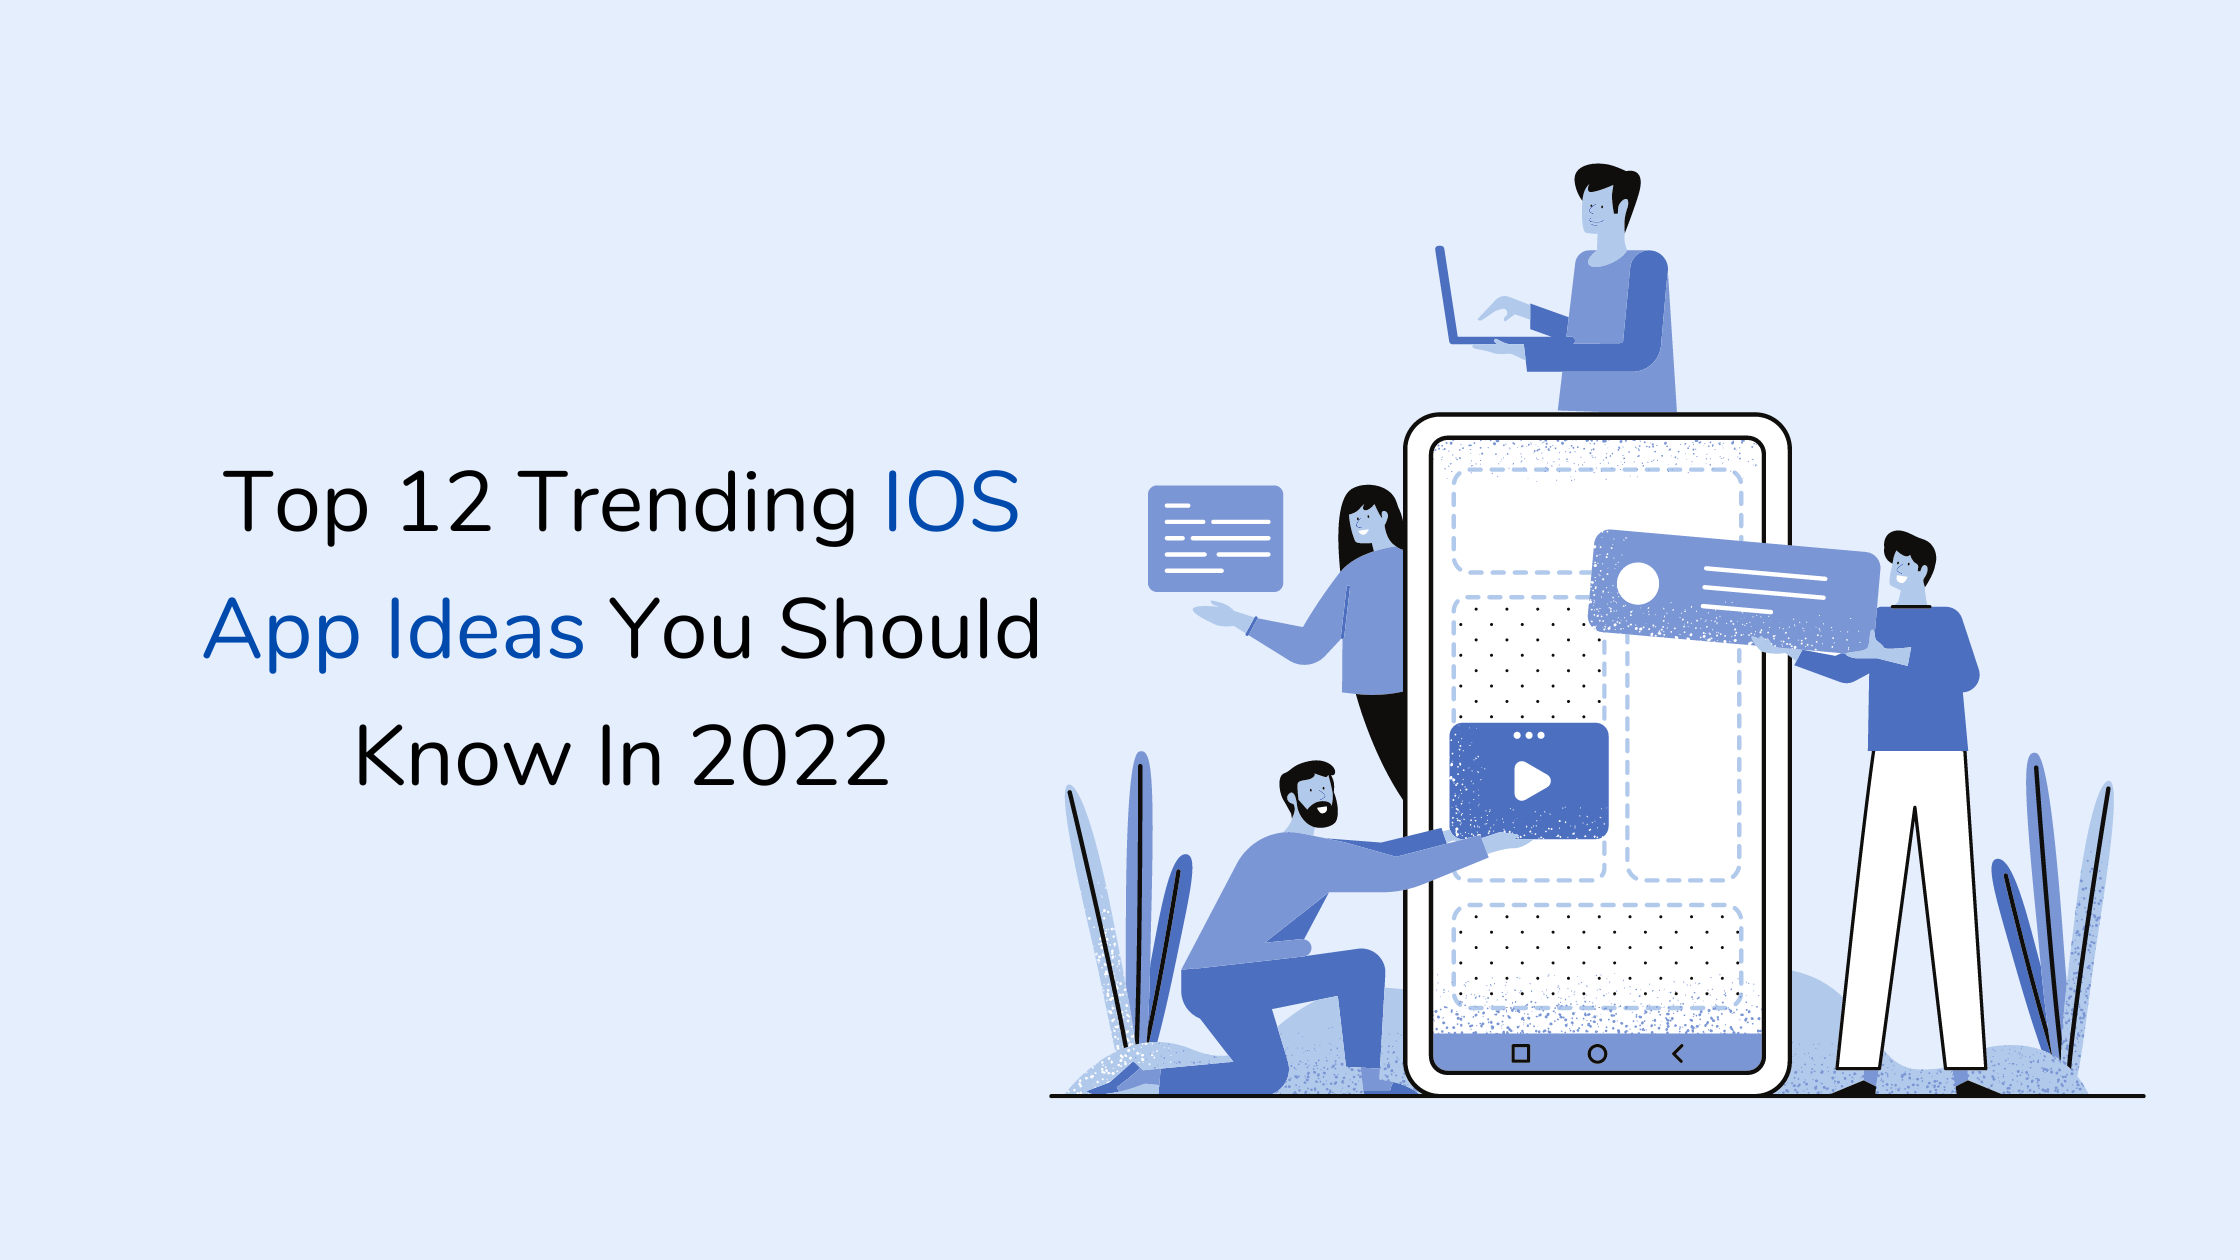 Top 12 Trending IOS App Ideas You Should Know